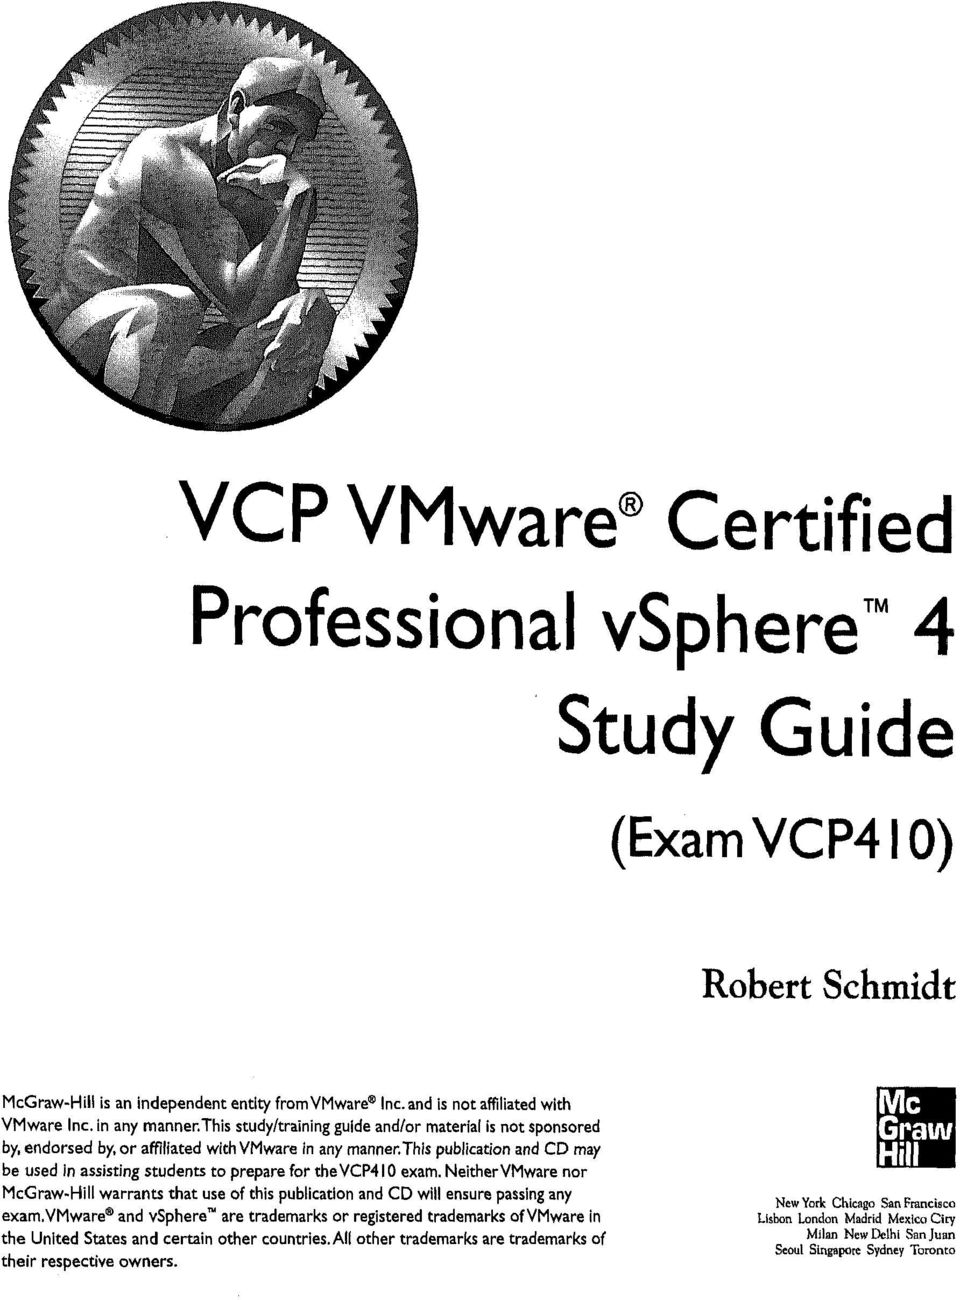 this publication and CD may be used in assisting students to prepare for thevcp4io exam. Neither VMware nor McGraw-Hill warrants that use of this publication and CD will ensure passing any exam.